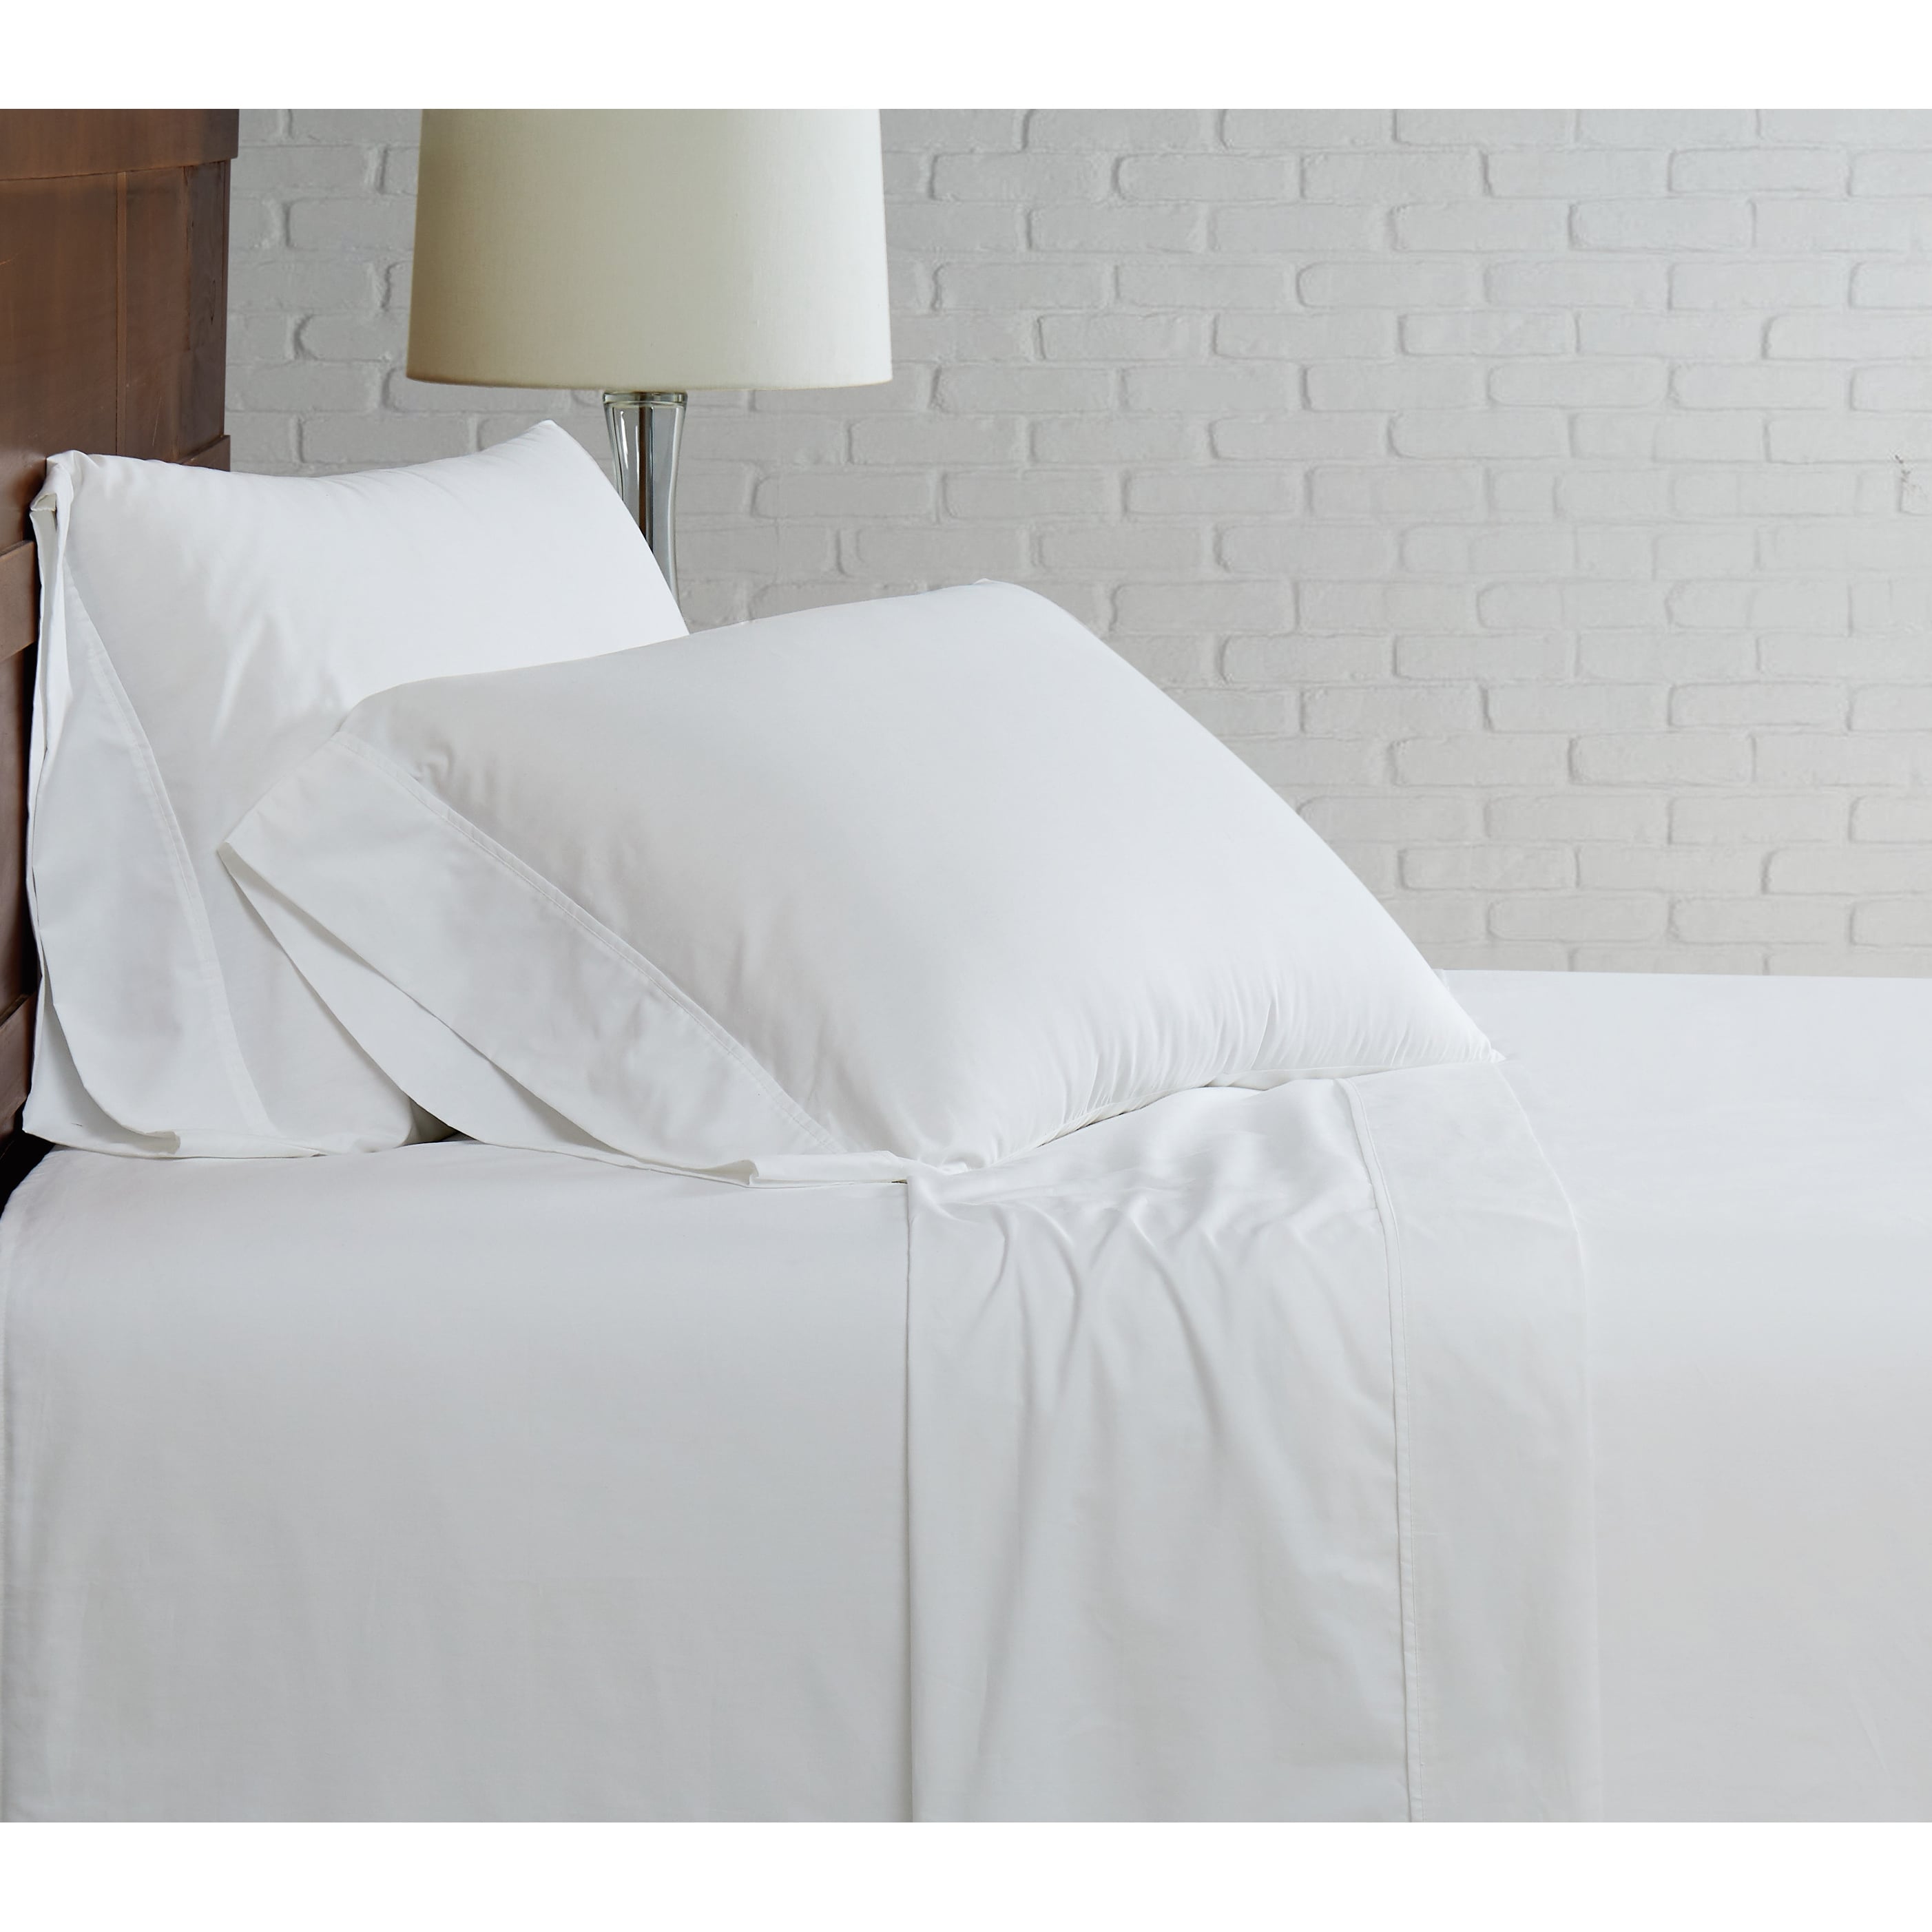 PERCALE EXTRA DEEP 100% COTTON BLEND POLY FITTED VALANCE BED SHEETS IN ALL SIZES 